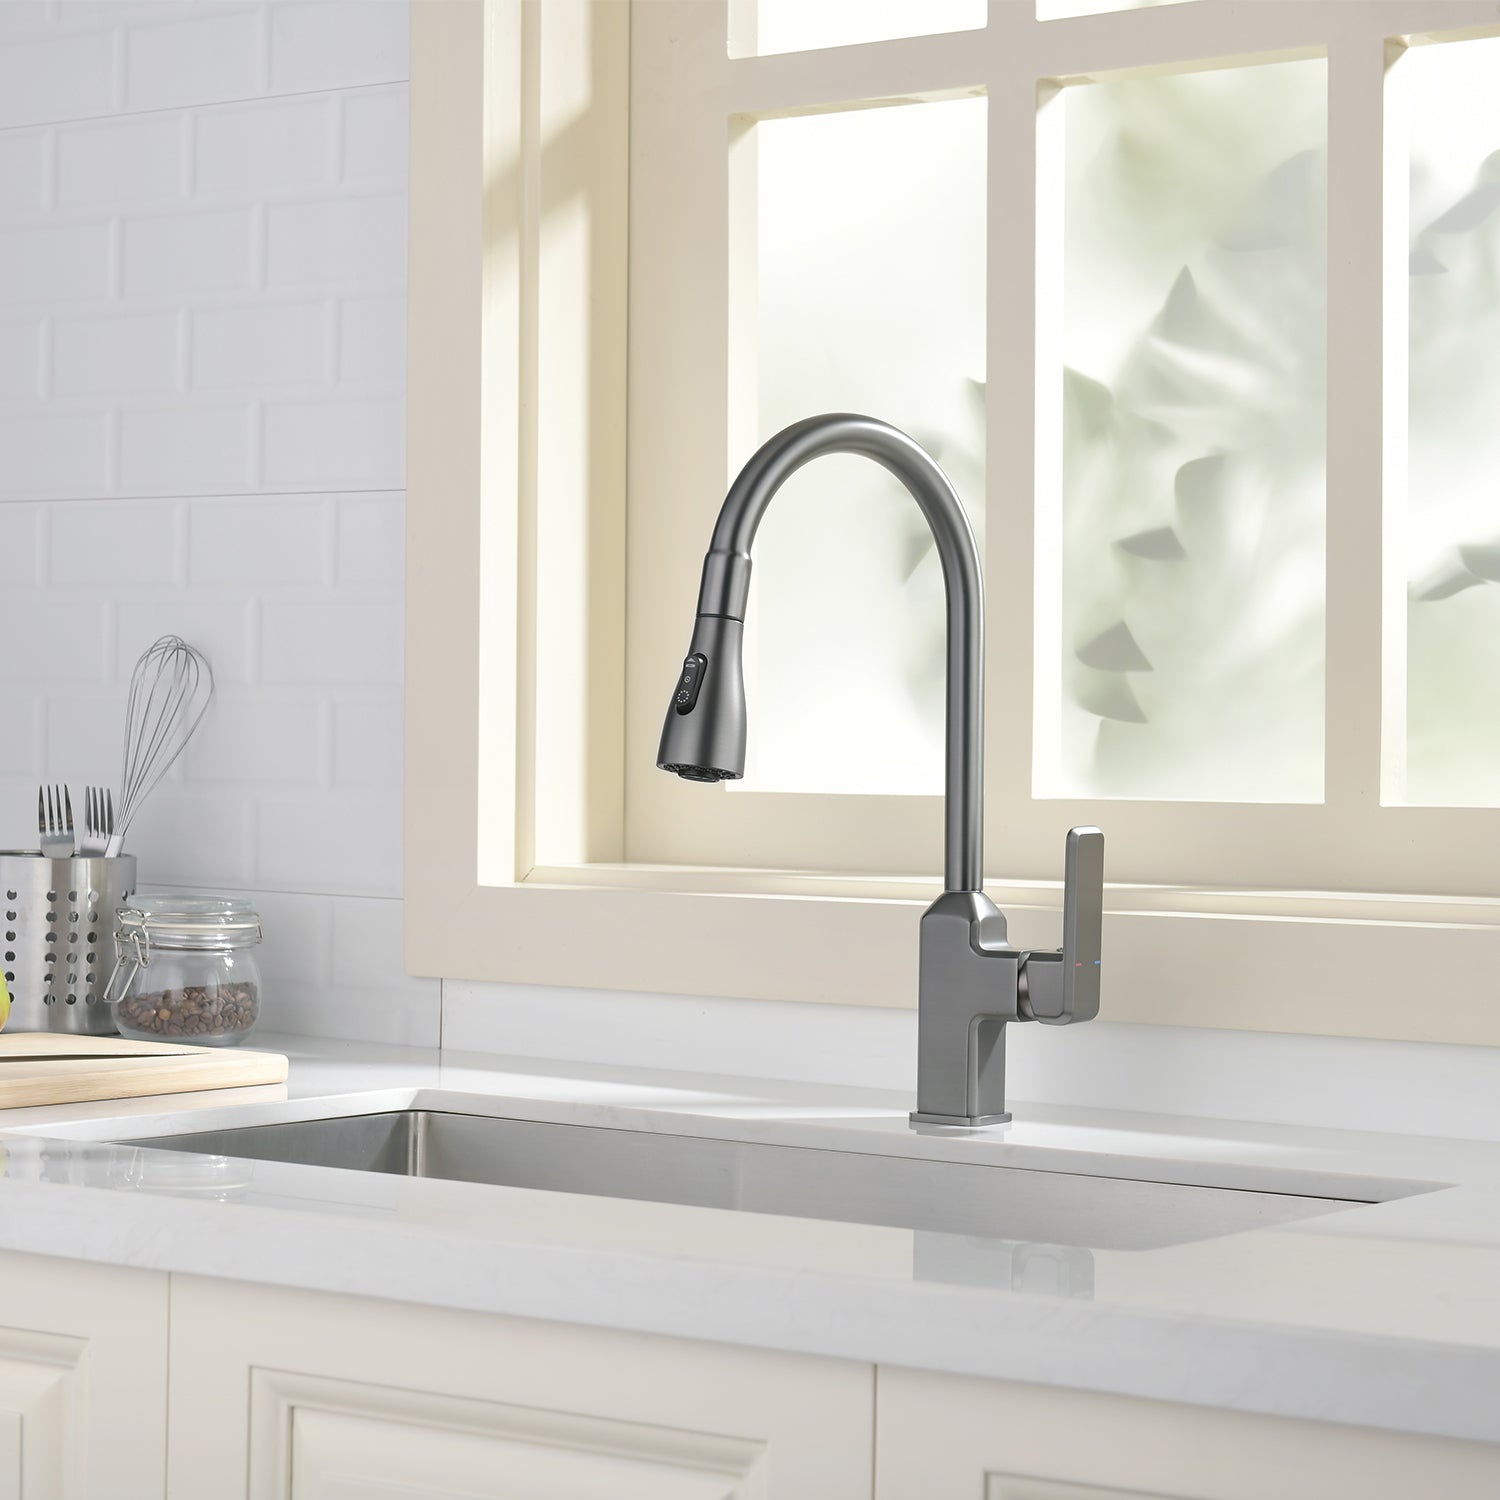 Lefton waterfall Kitchen Pull-Down Faucet with 3 Water Outlet Modes-KF2201 -Kitchen Faucets